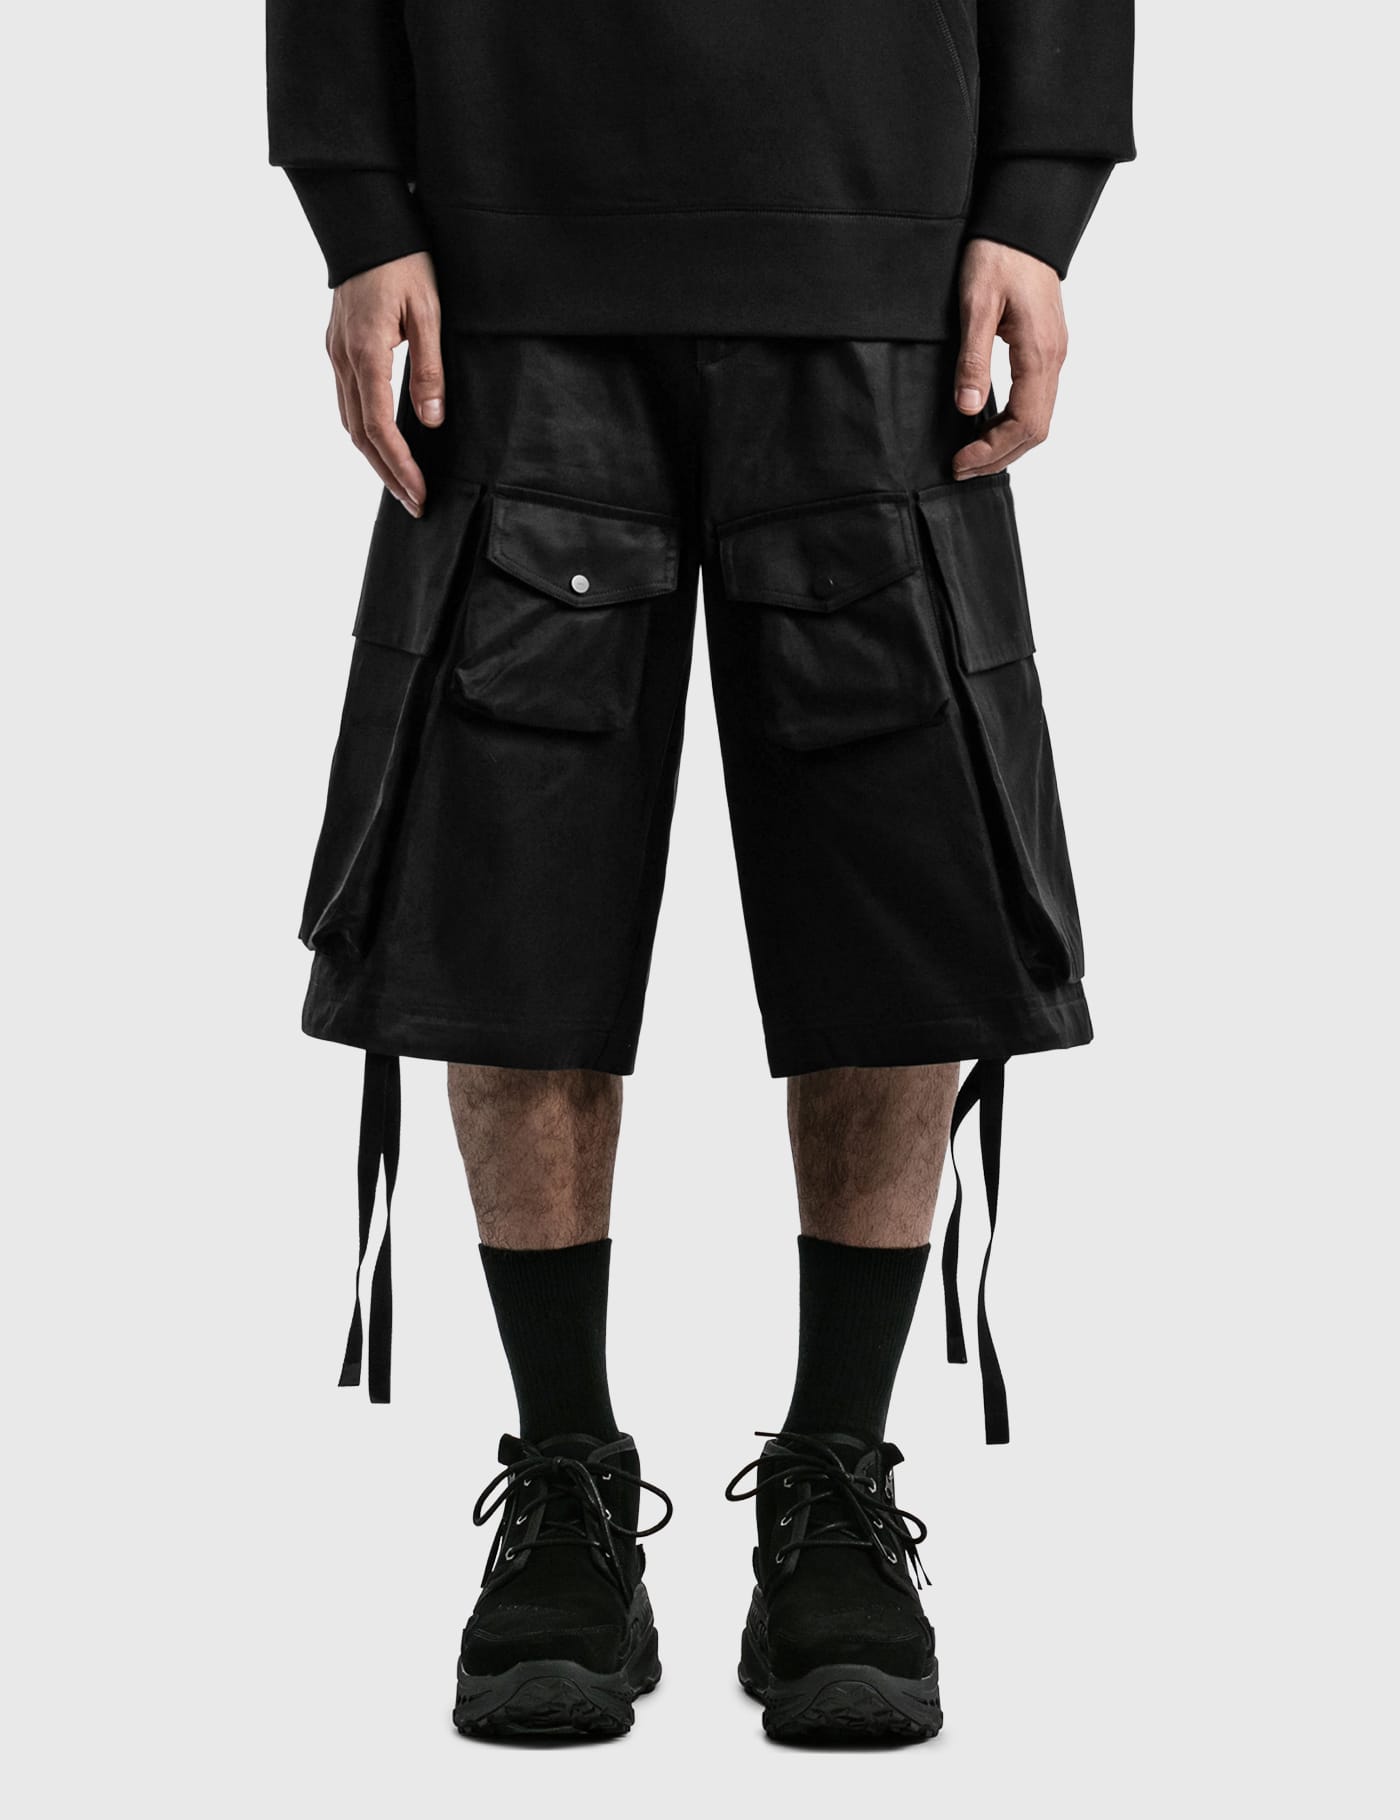 Moncler Genius - 1952 Wide Cargo Shorts | HBX - Globally Curated 